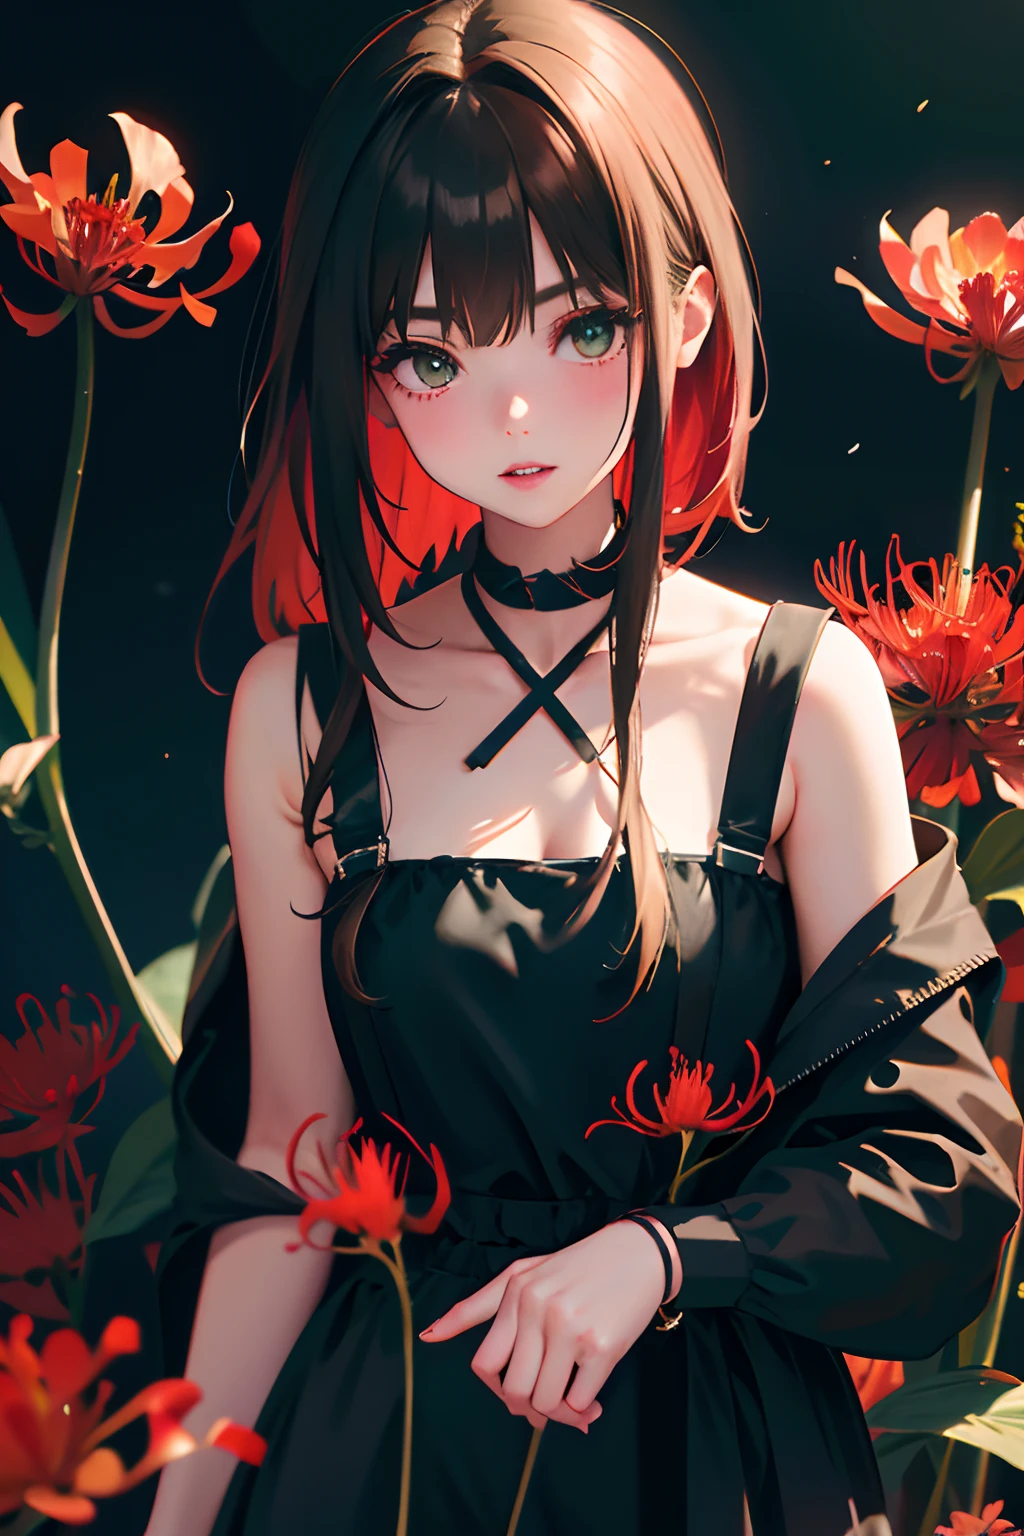 (Fine, beautiful eyes and detailed face)、cinematlic lighting、bustshot、Highly detailed CG Unity 8K wallpaper、(top-quality、hight resolution、8K、​masterpiece:1.2)。Curvaceous but slender、Muchimuchi Body、Red Spider Lily Field、Red modal lilies are blooming all around、Red Spider Lily、Grinning Woman、Red spider lily sits in the middle of blooming。With a somewhat horror look、Eight teeth are characteristic。Wear bloody clothes、Has an ax。Crazy looks and the gap between her and Red Spider Lily、Further enhance her beauty。Half-garment hoodie、accessorized、mole、eyebrows、double tooth、canine teeth、poneyTail、Muscular nose、Clear, Detailed green eyes、blondehair、Hats、Uniforms、red blush、short-haired、a choker、fleshy lips、Physical beauty、well-muscled、Raise headband bangs、Oforehead、Mysterious fashion、Street fashion、Anime style、and souls、Oversized trousers、Unreal、Fashion based on green and black、Backgrounds with depth、The background is a field of bright red lilies、10,000 Red Spider Lily。a necklace、Braceletisanga、arm band、colorful backdrop、Light and Wall Co-star、Little black cat clinging to his shoulder、Original face、(dark themed:1.3)、Dark Fantasy、Long Black Hair、